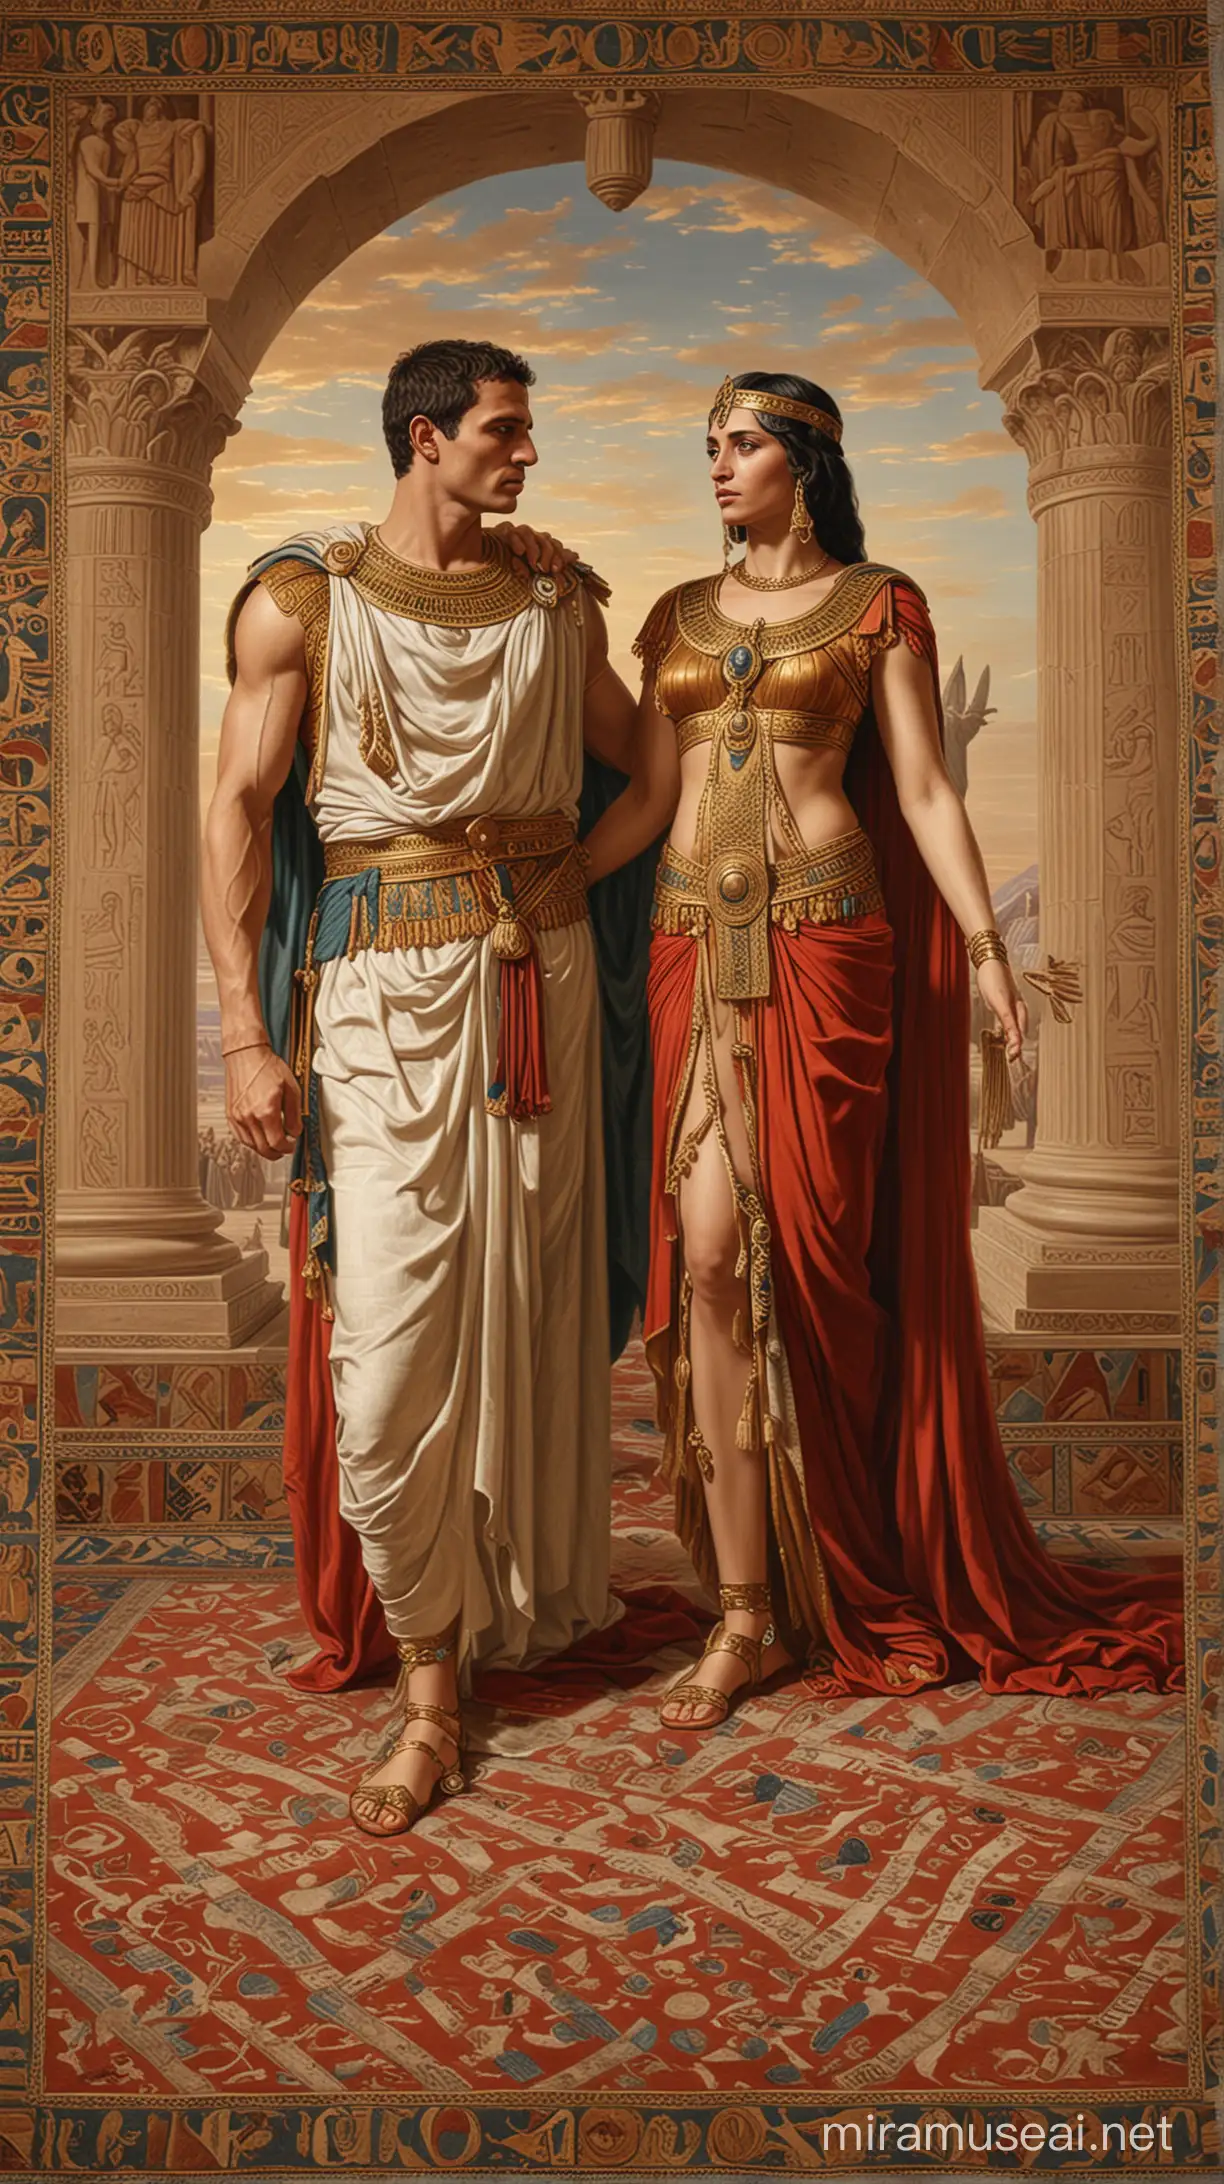 Depictions of Julius Caesar's arrival in Egypt, with Cleopatra presenting herself to him on a luxurious carpet, emphasizing her attempts to regain power through seduction. hyperealistic